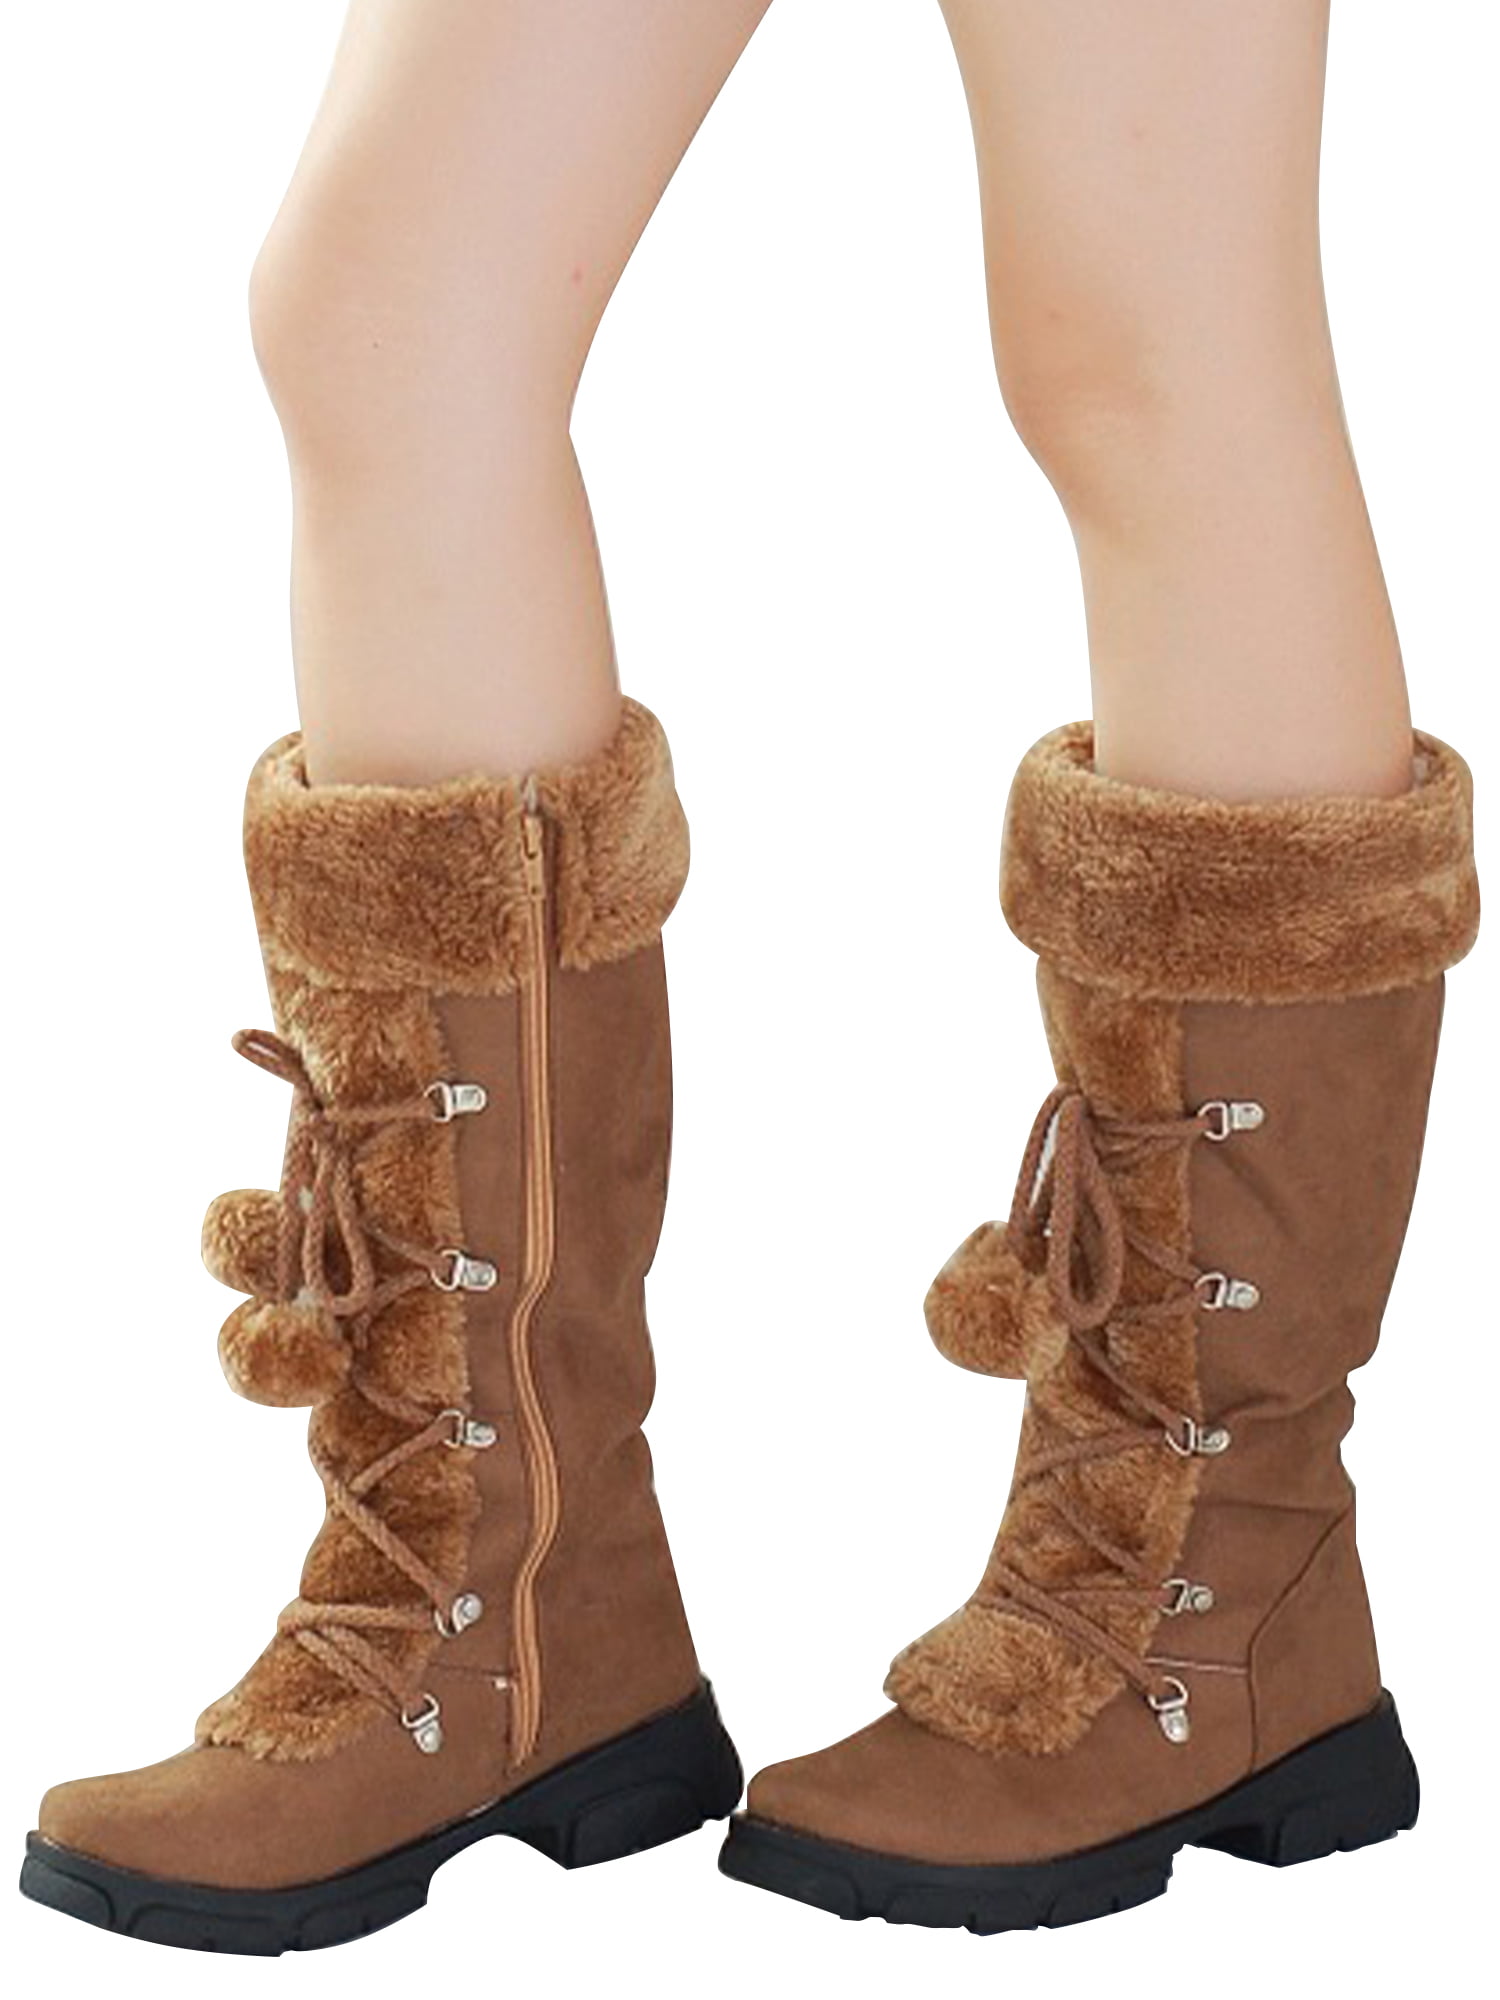 Women's Winter Snow Boots Over Knee High Boots Pull on Boots Warm Outdoor Shoes